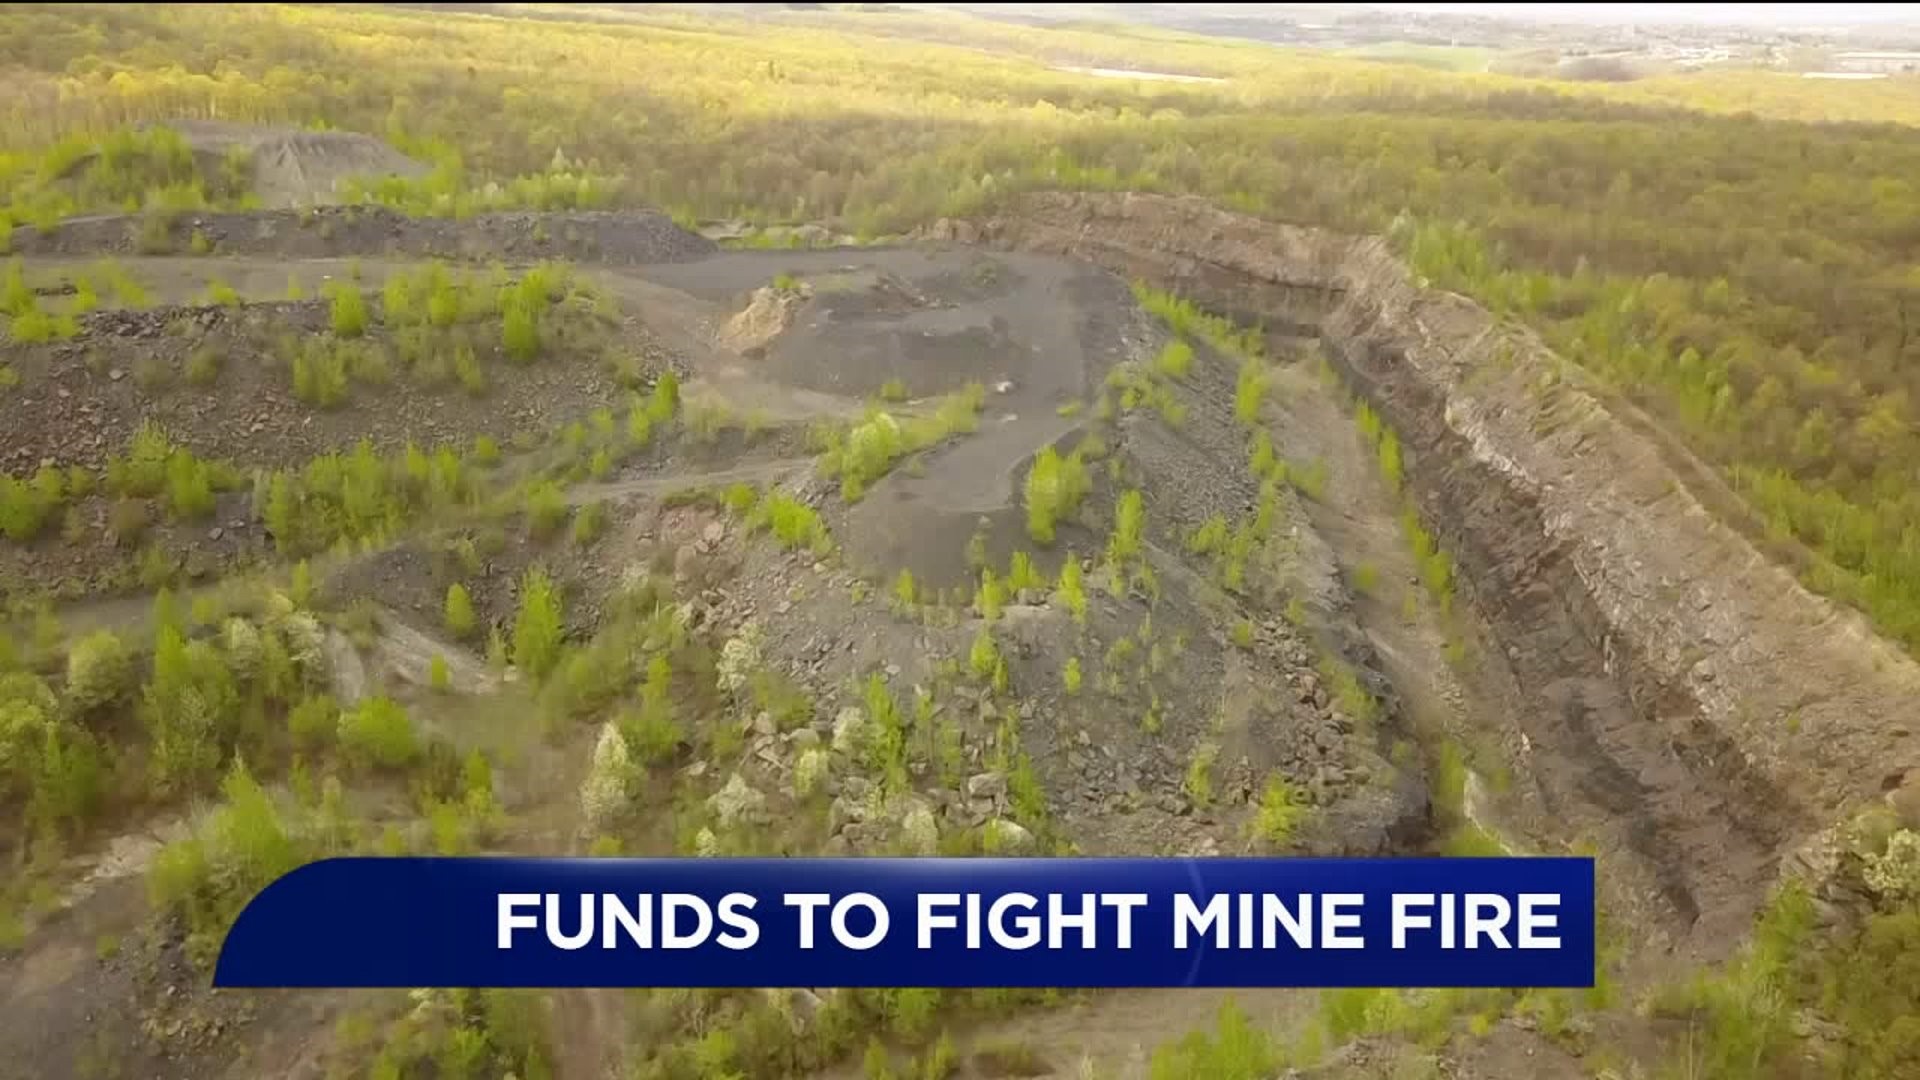 State Funds to Fight Mine Fire in Olyphant